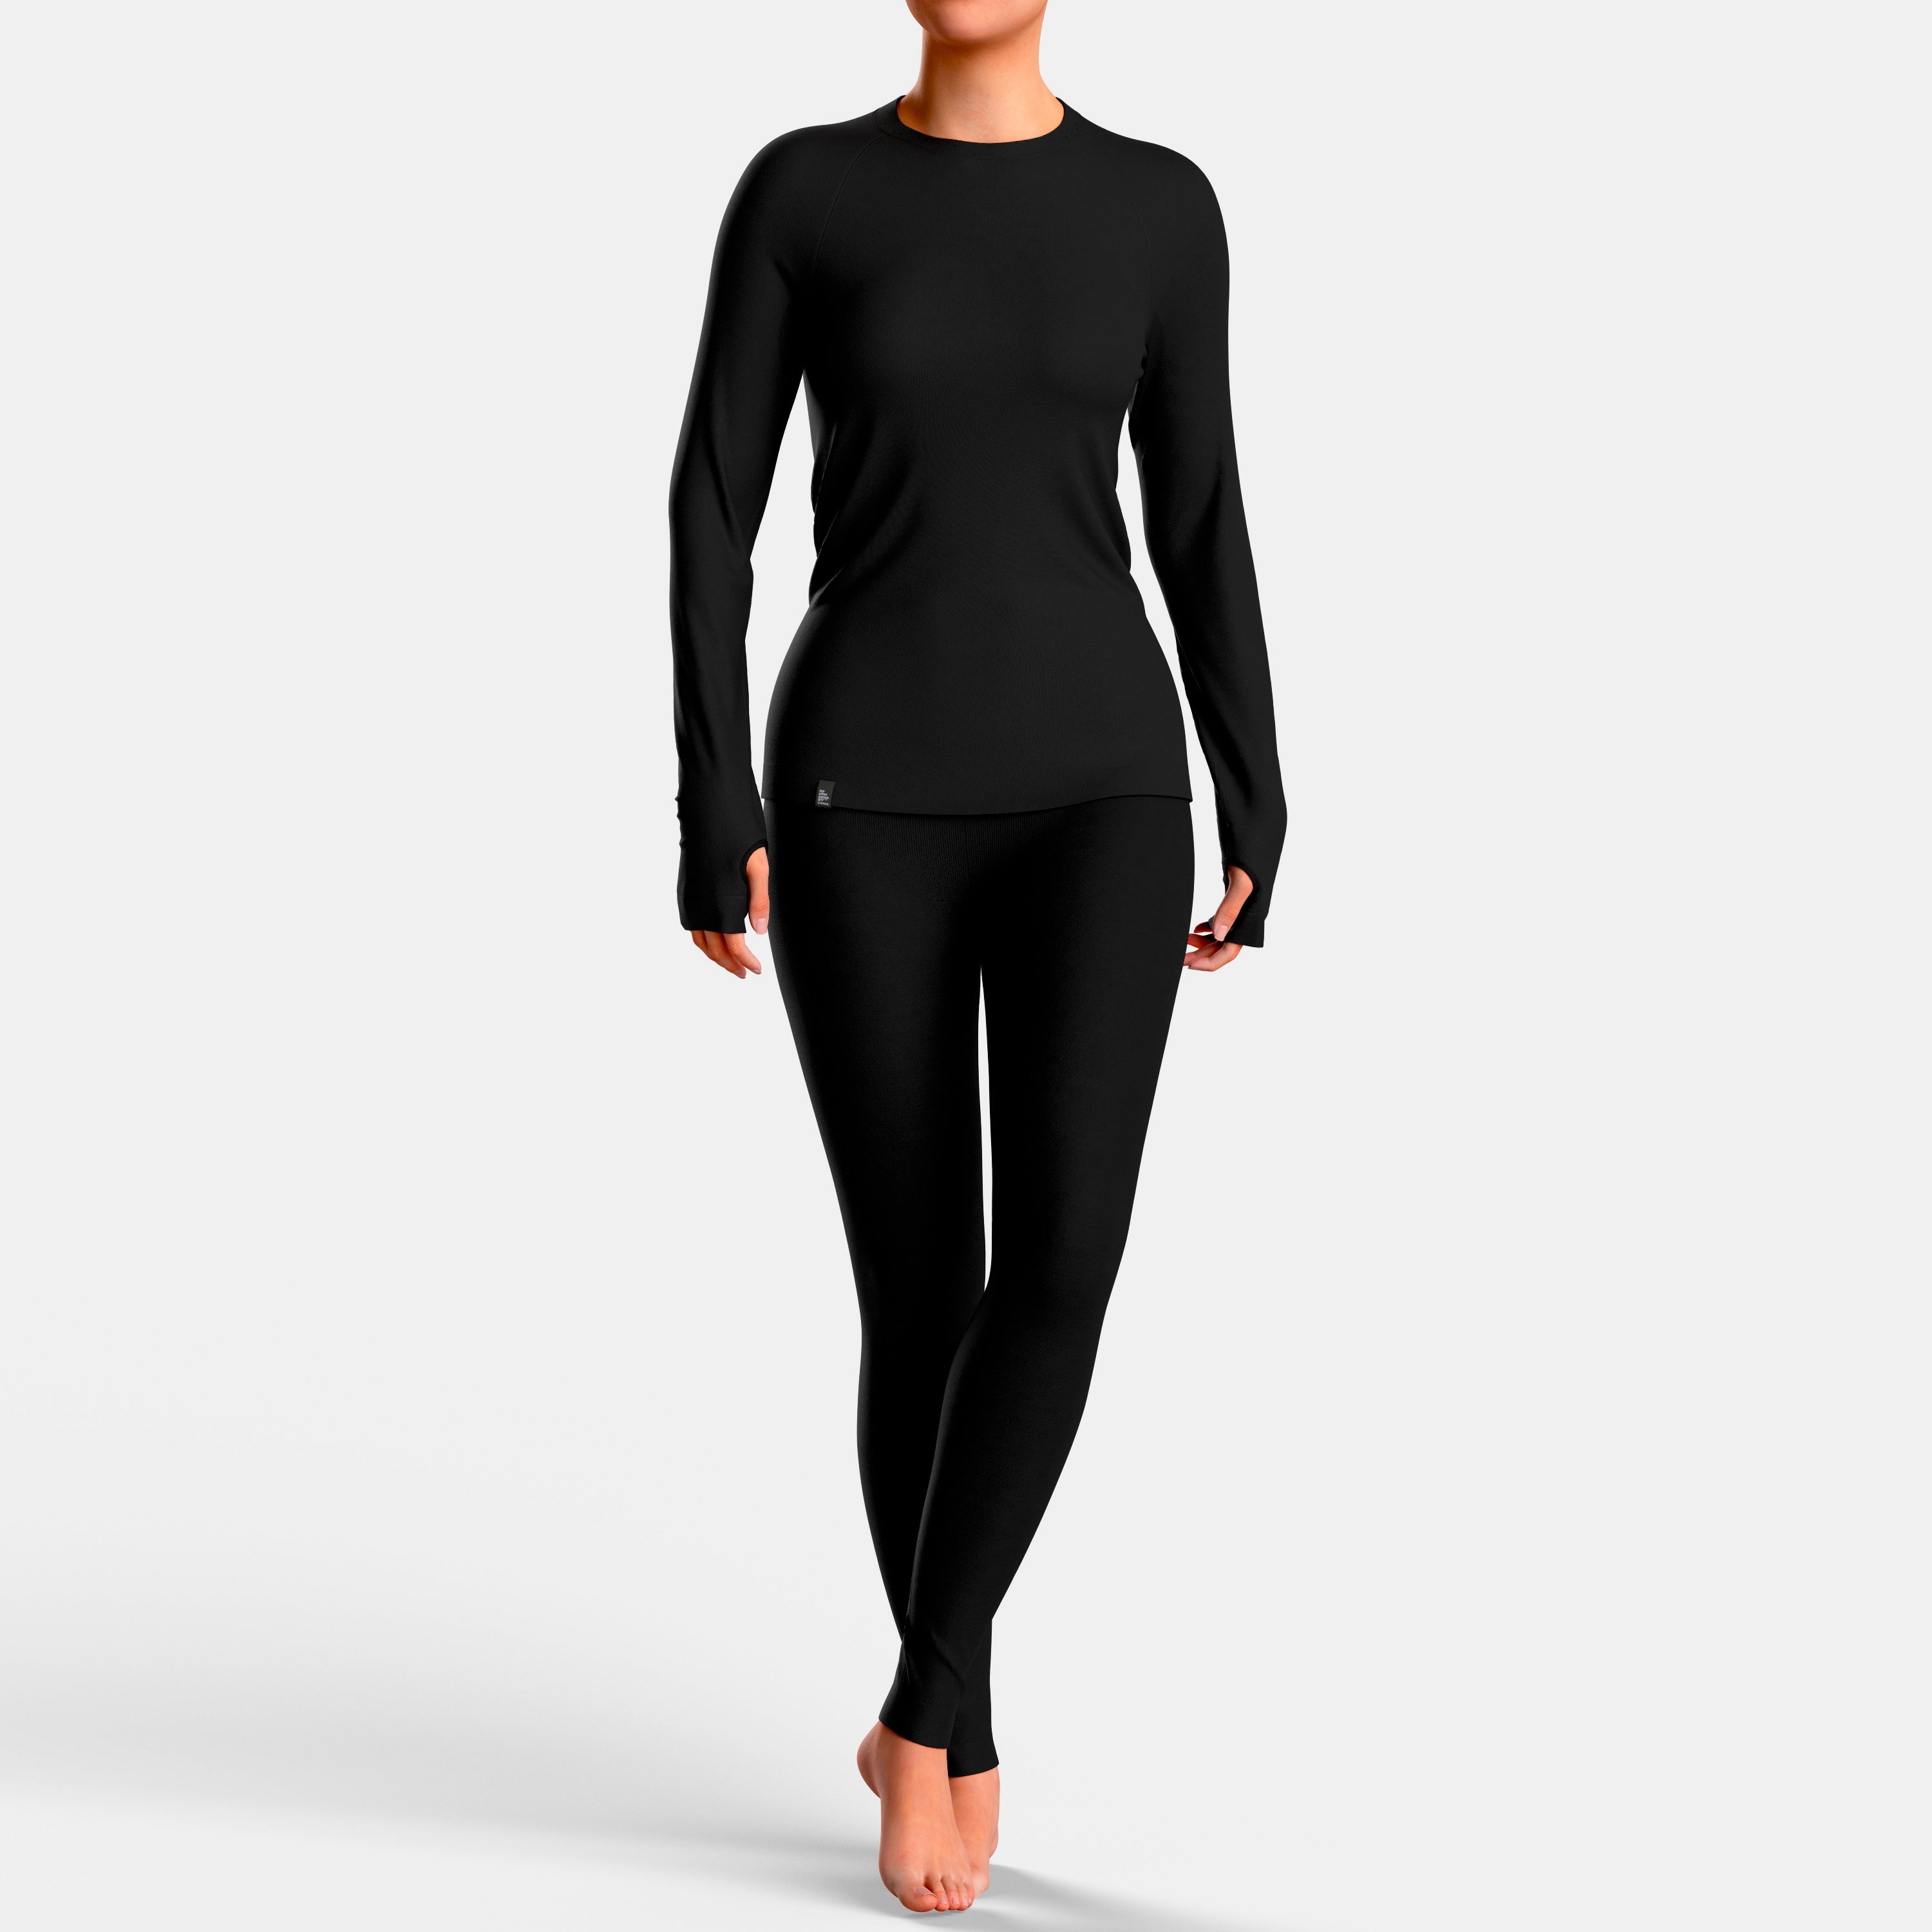 Women's Stealth Pant